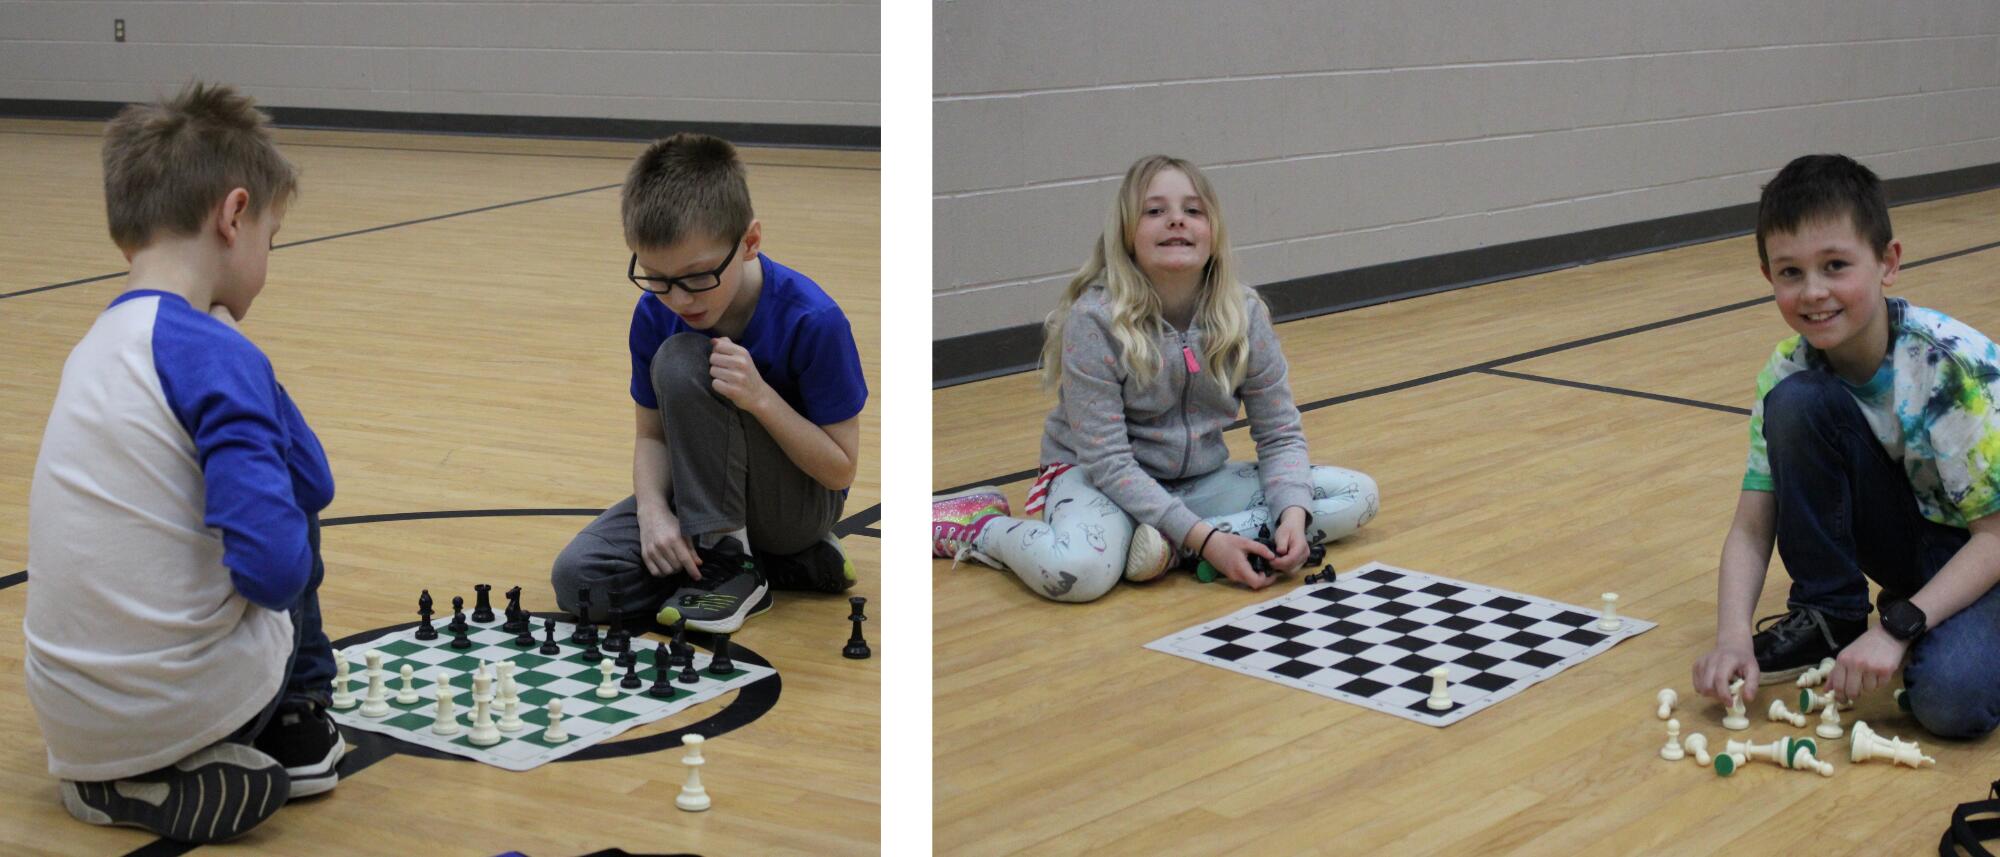 Students applying what they learned and playing chess